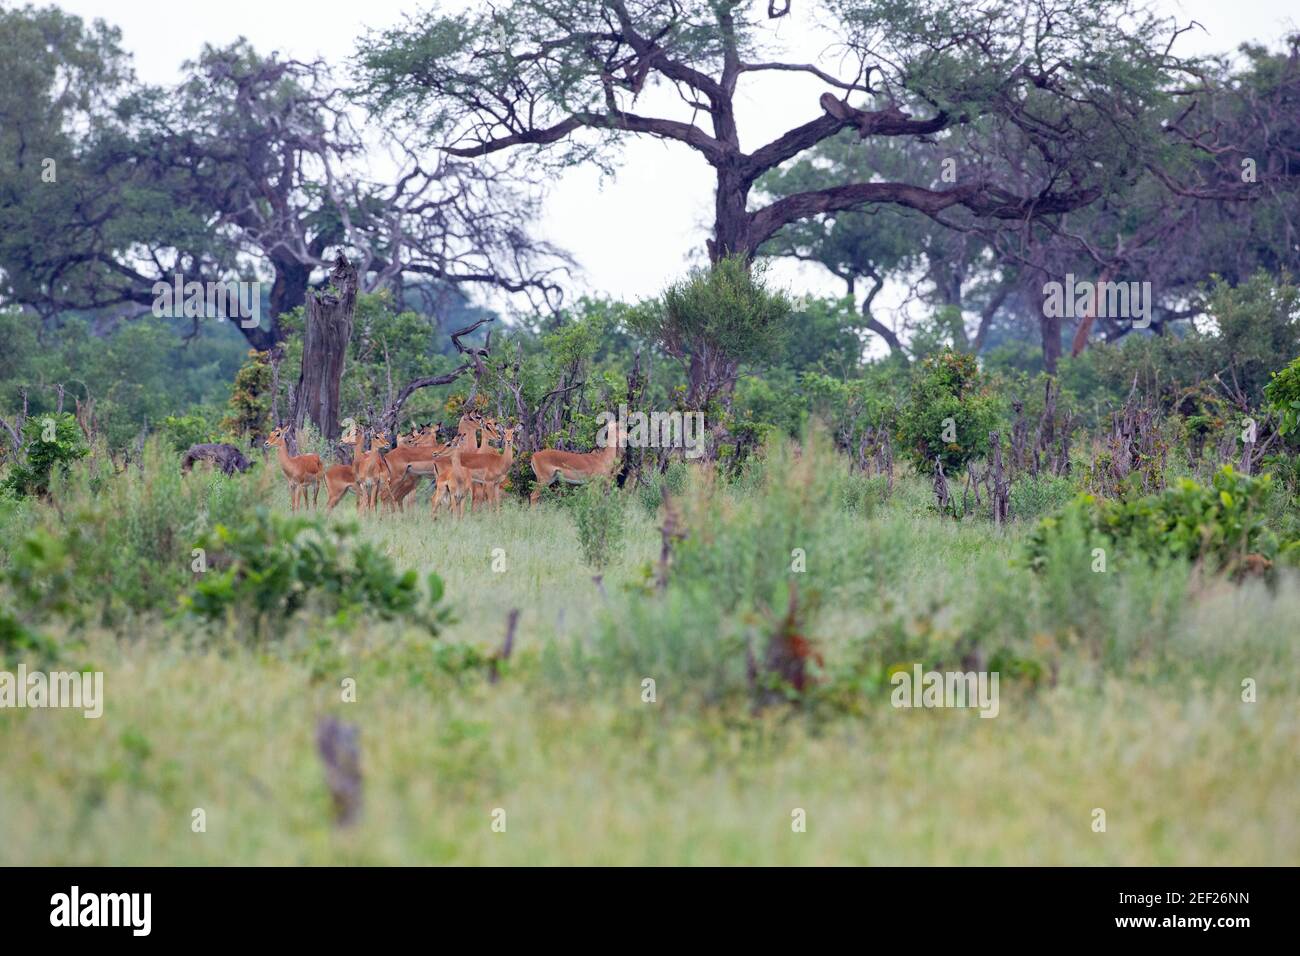 Impala (Aepyceros melampus). Twelve females bunched closely together amongst woodland cover, expressing anxiety over near distant possible approach of Stock Photo